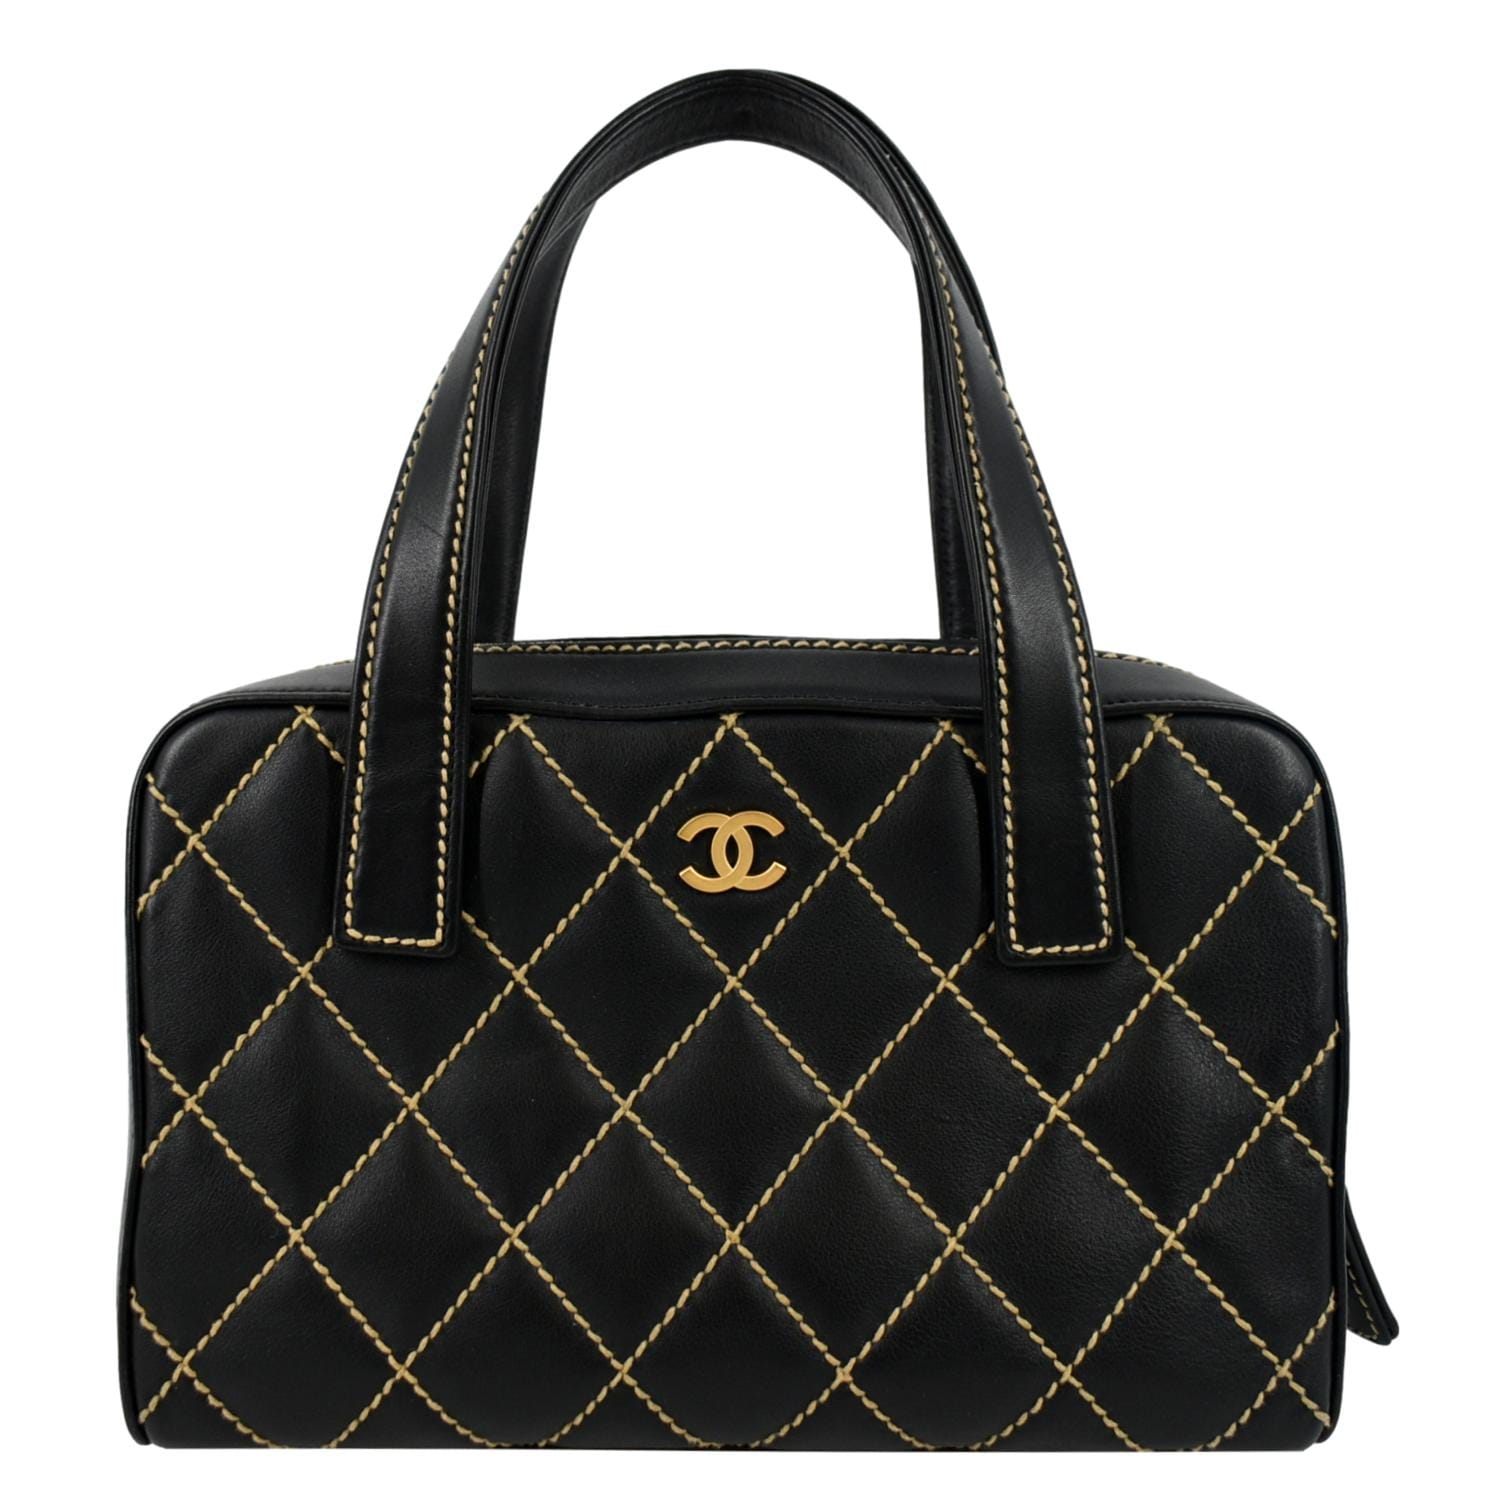 CHANEL, Bags, Authentic Chanel Cc Cc Mark Wild Stitch Mini Duffle Bag  Hand Bag Leather Brown